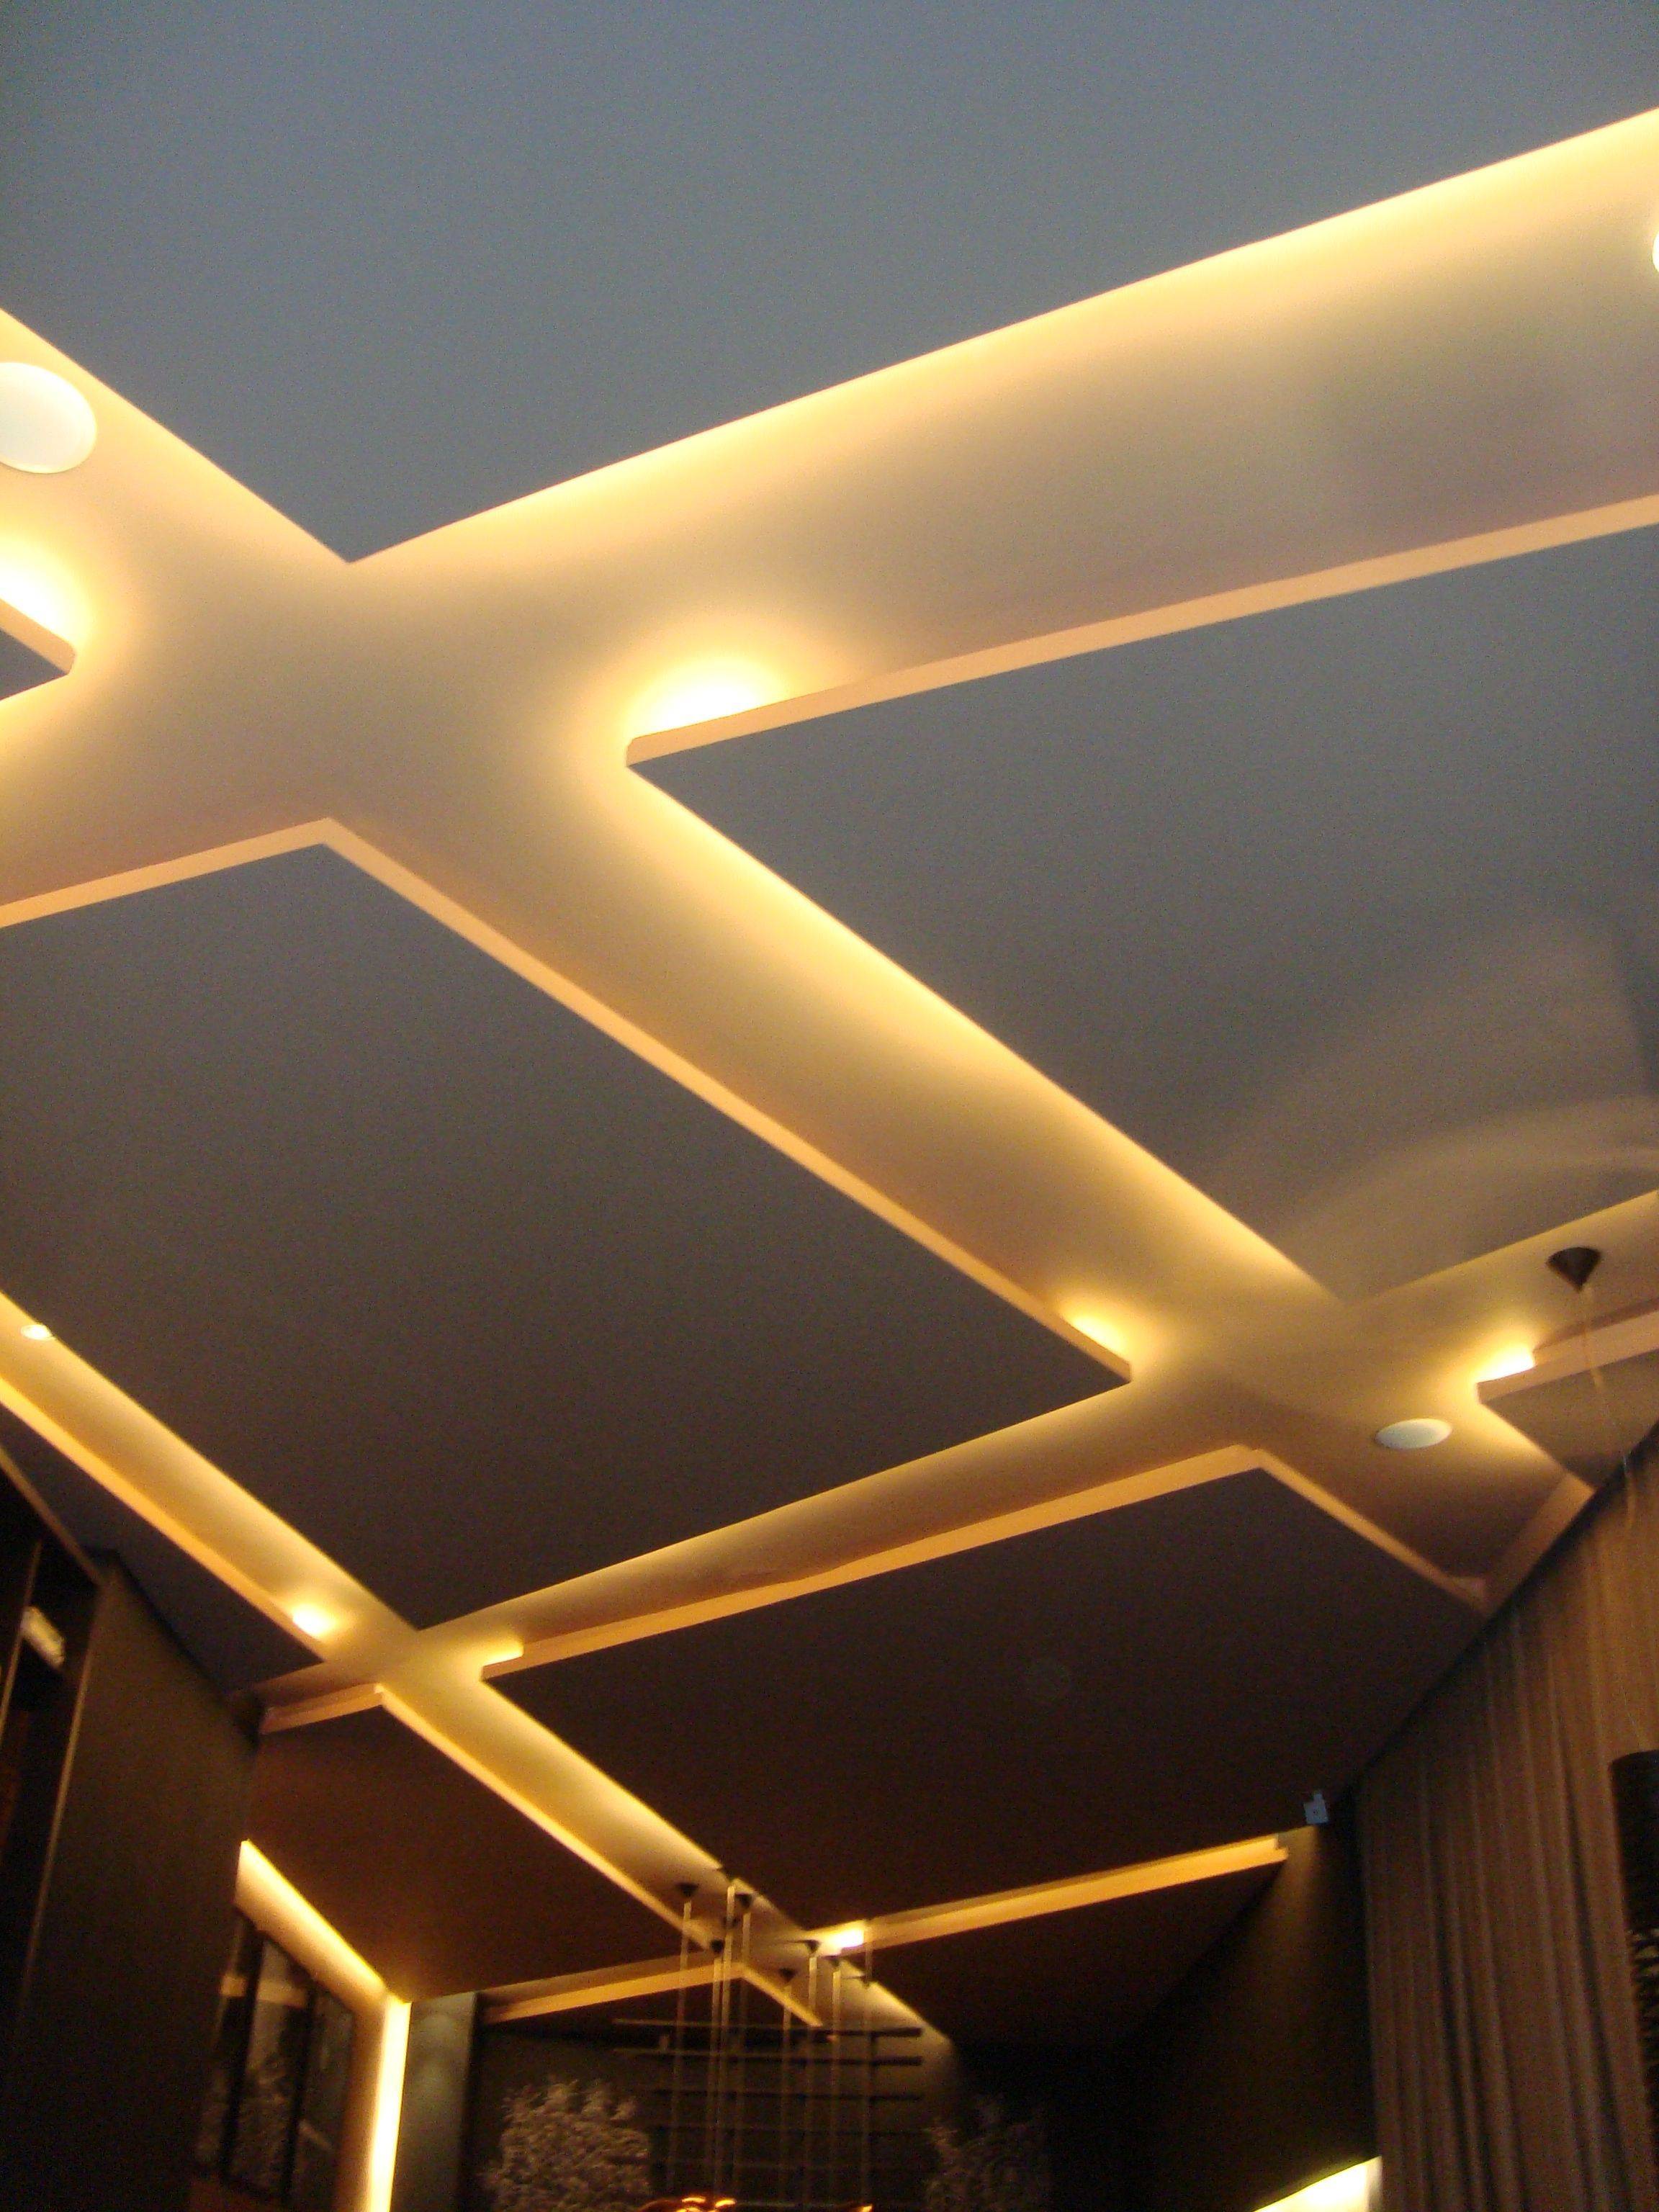 New Ceiling Patterns 